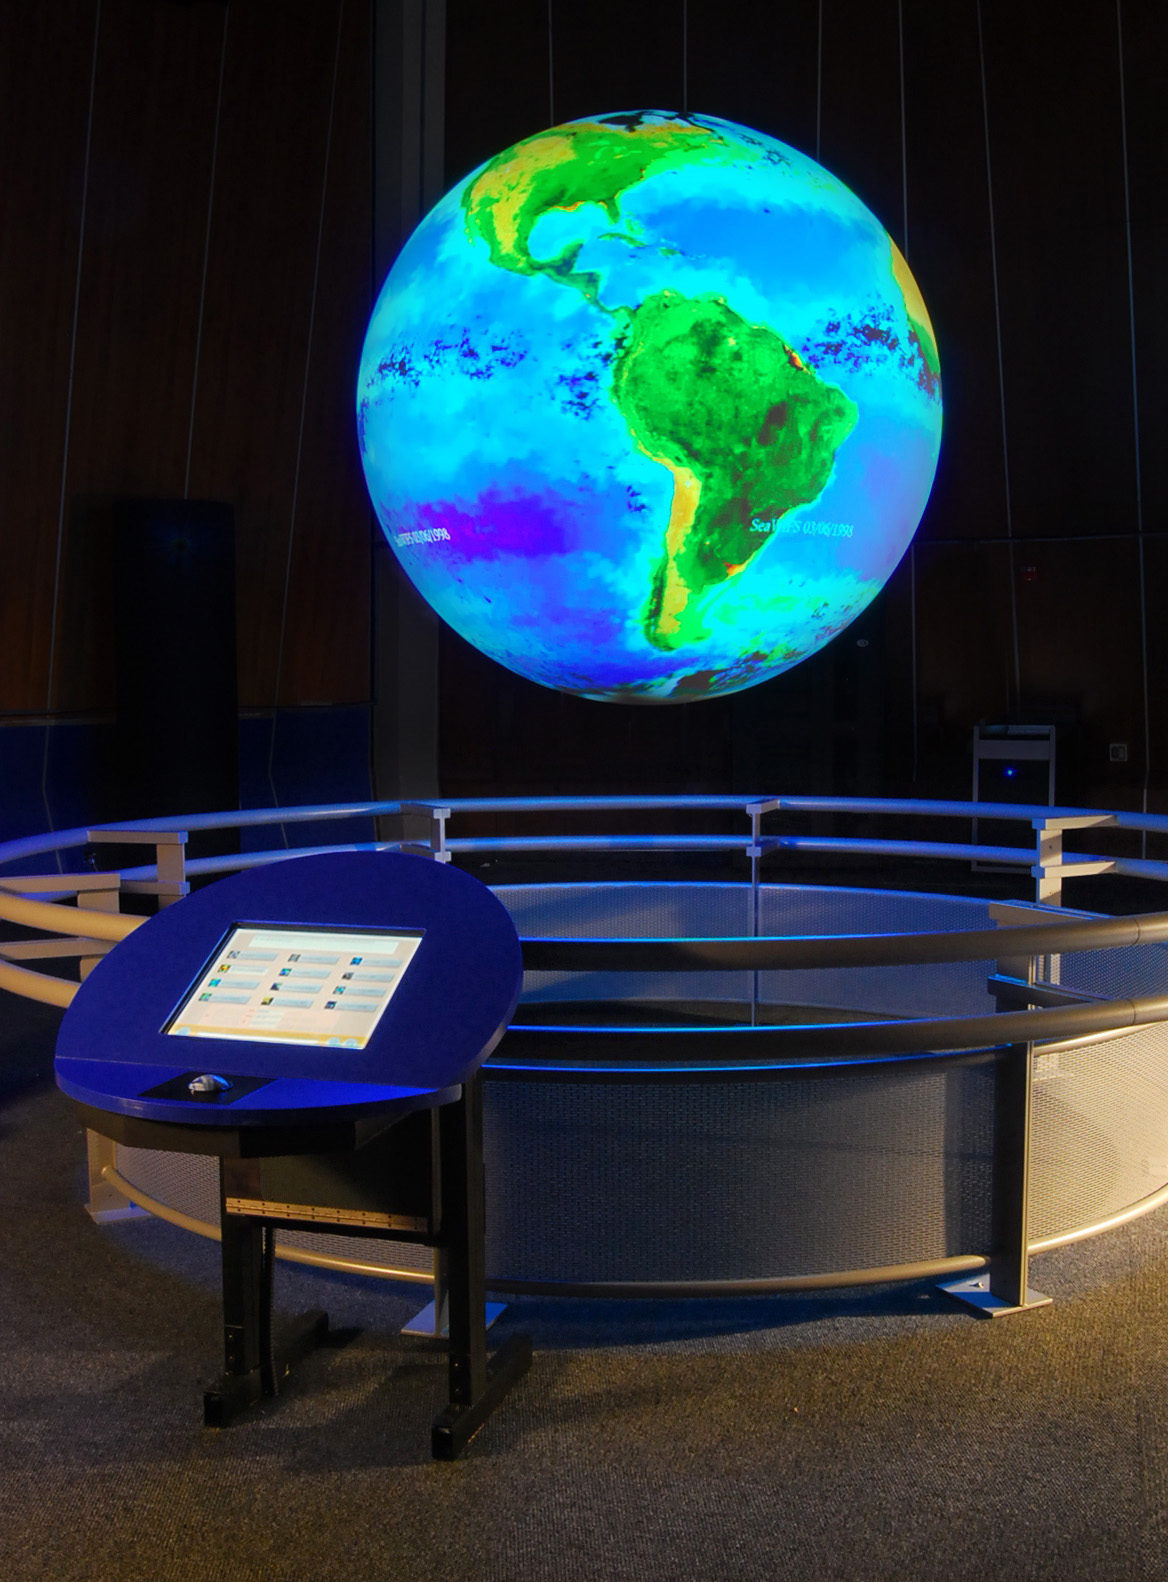 Science On a Sphere hangs in an empty room displaying an image of Earth that depicts North and South America in hues of green, yellow, and red, and the oceans in hues of blue and purple. A touchscreen is visible in the foreground